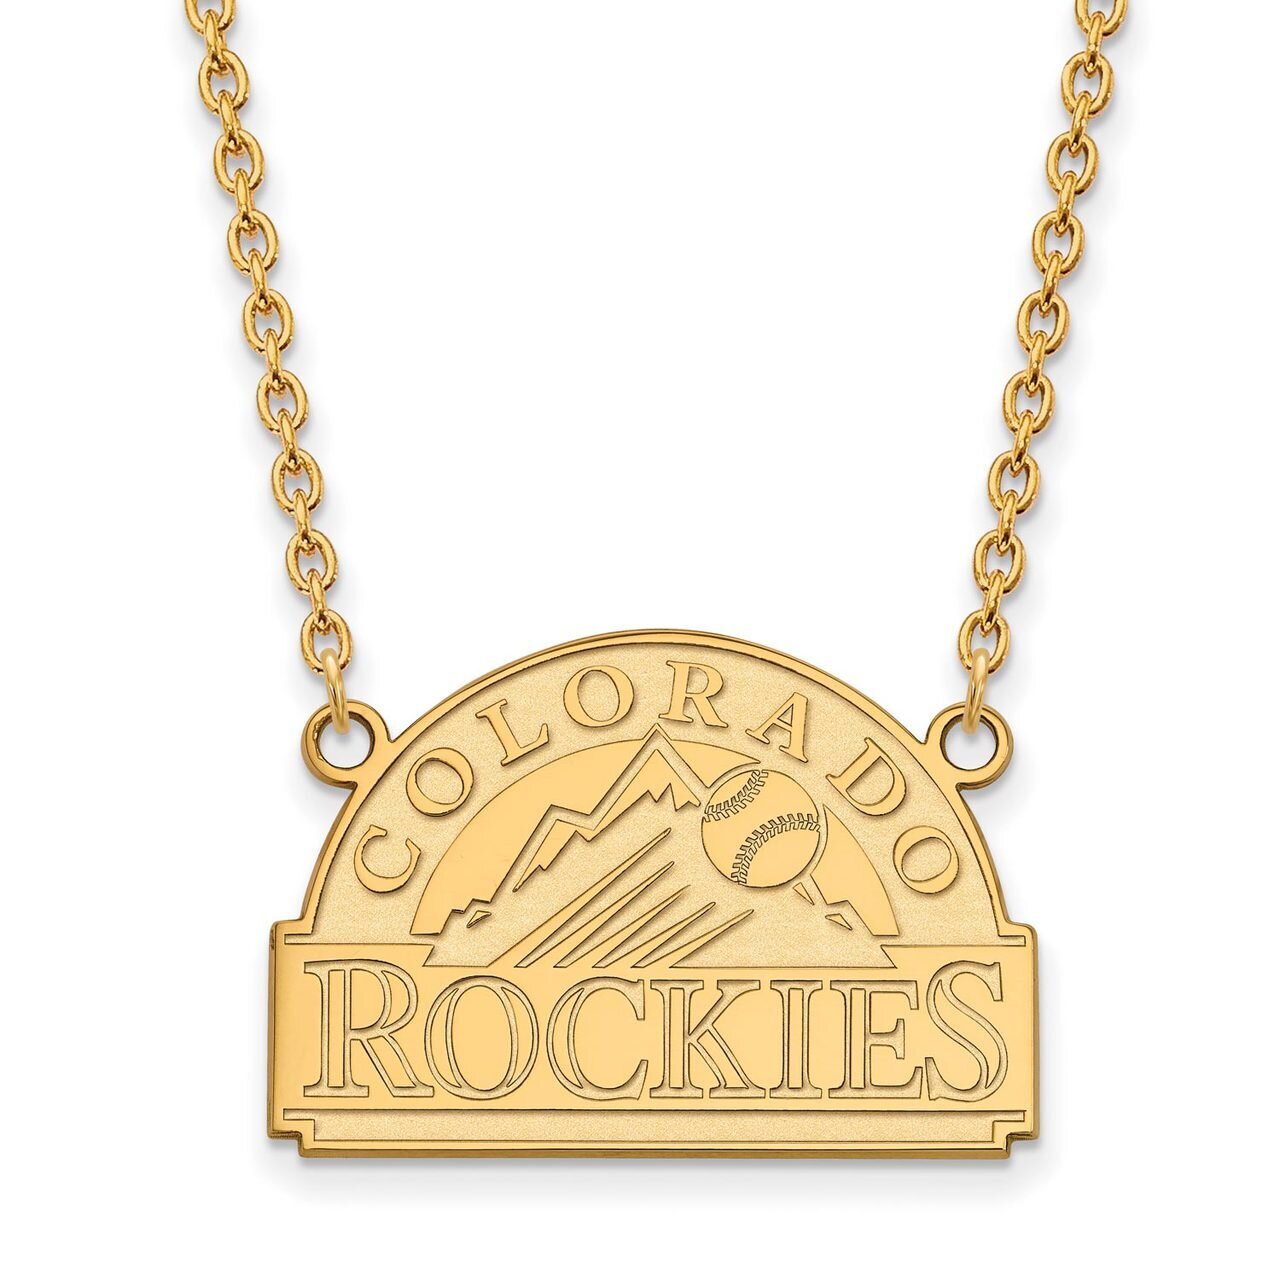 Colorado Rockies Large Pendant with Chain Necklace 14k Yellow Gold 4Y007ROK-18